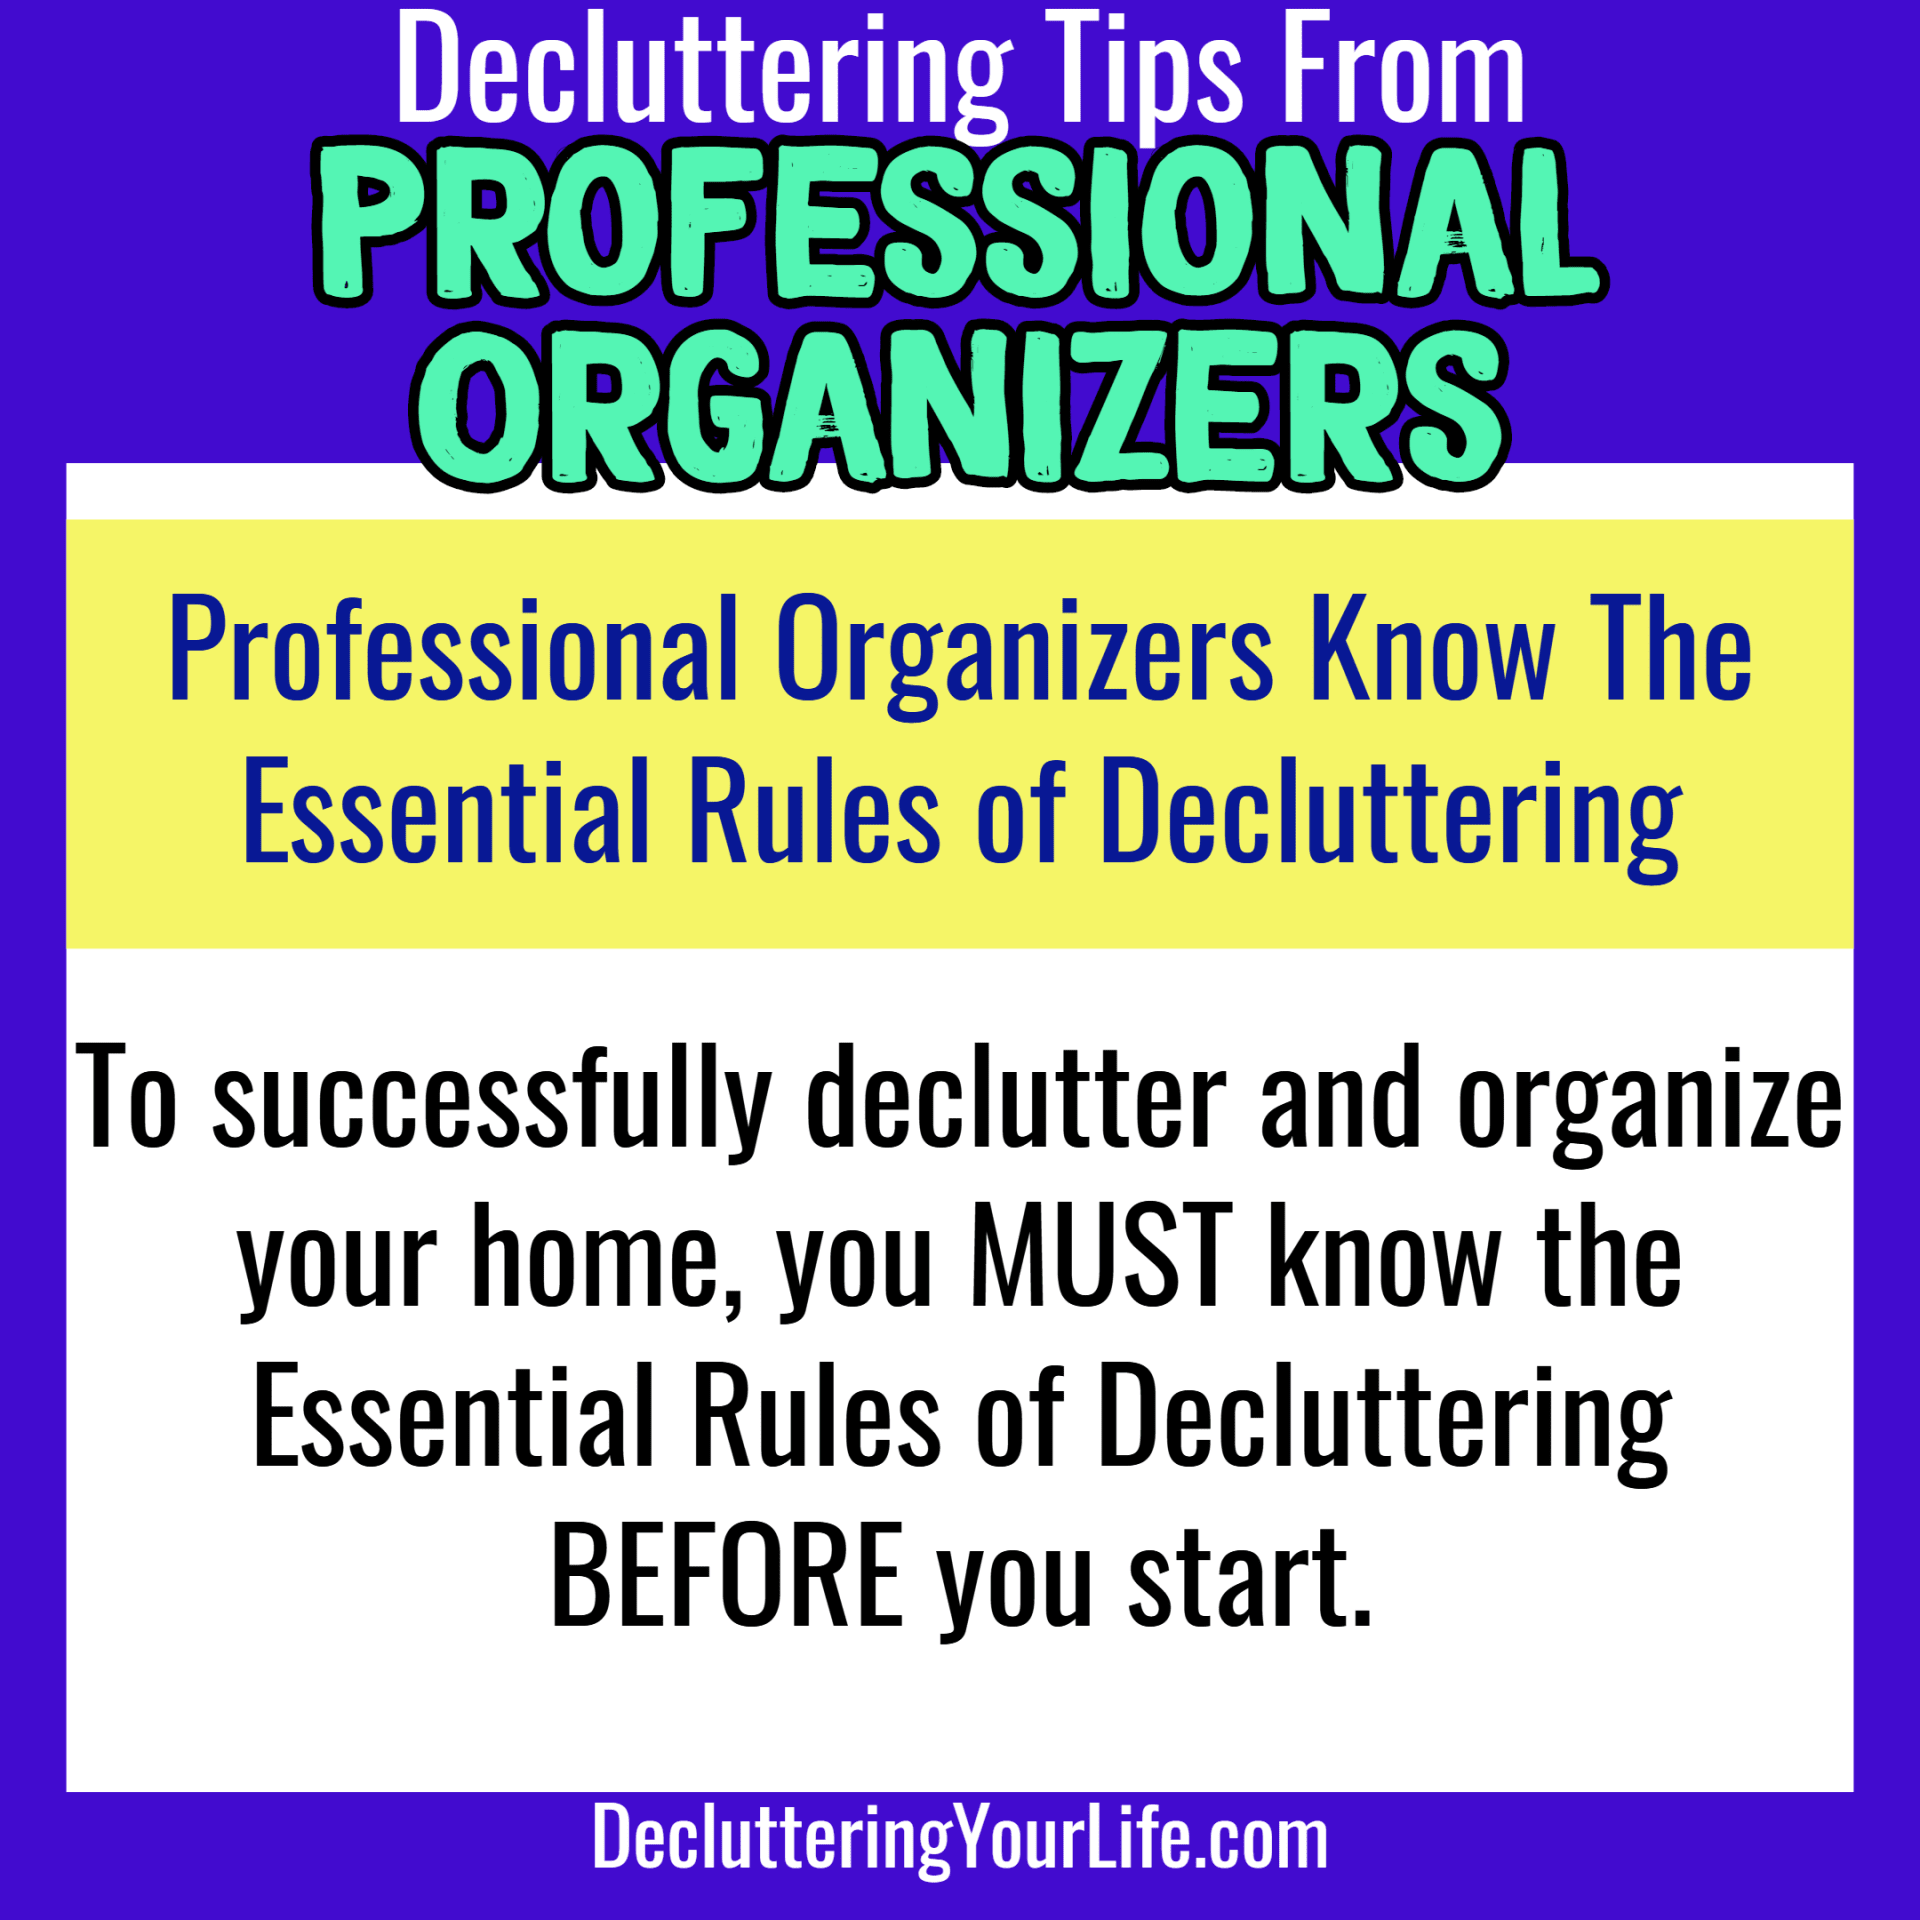 Tips from Professional Organizers for Uncluttering Your Home.  Go from cluttered mess to organized success with these tips from Professional Organizers